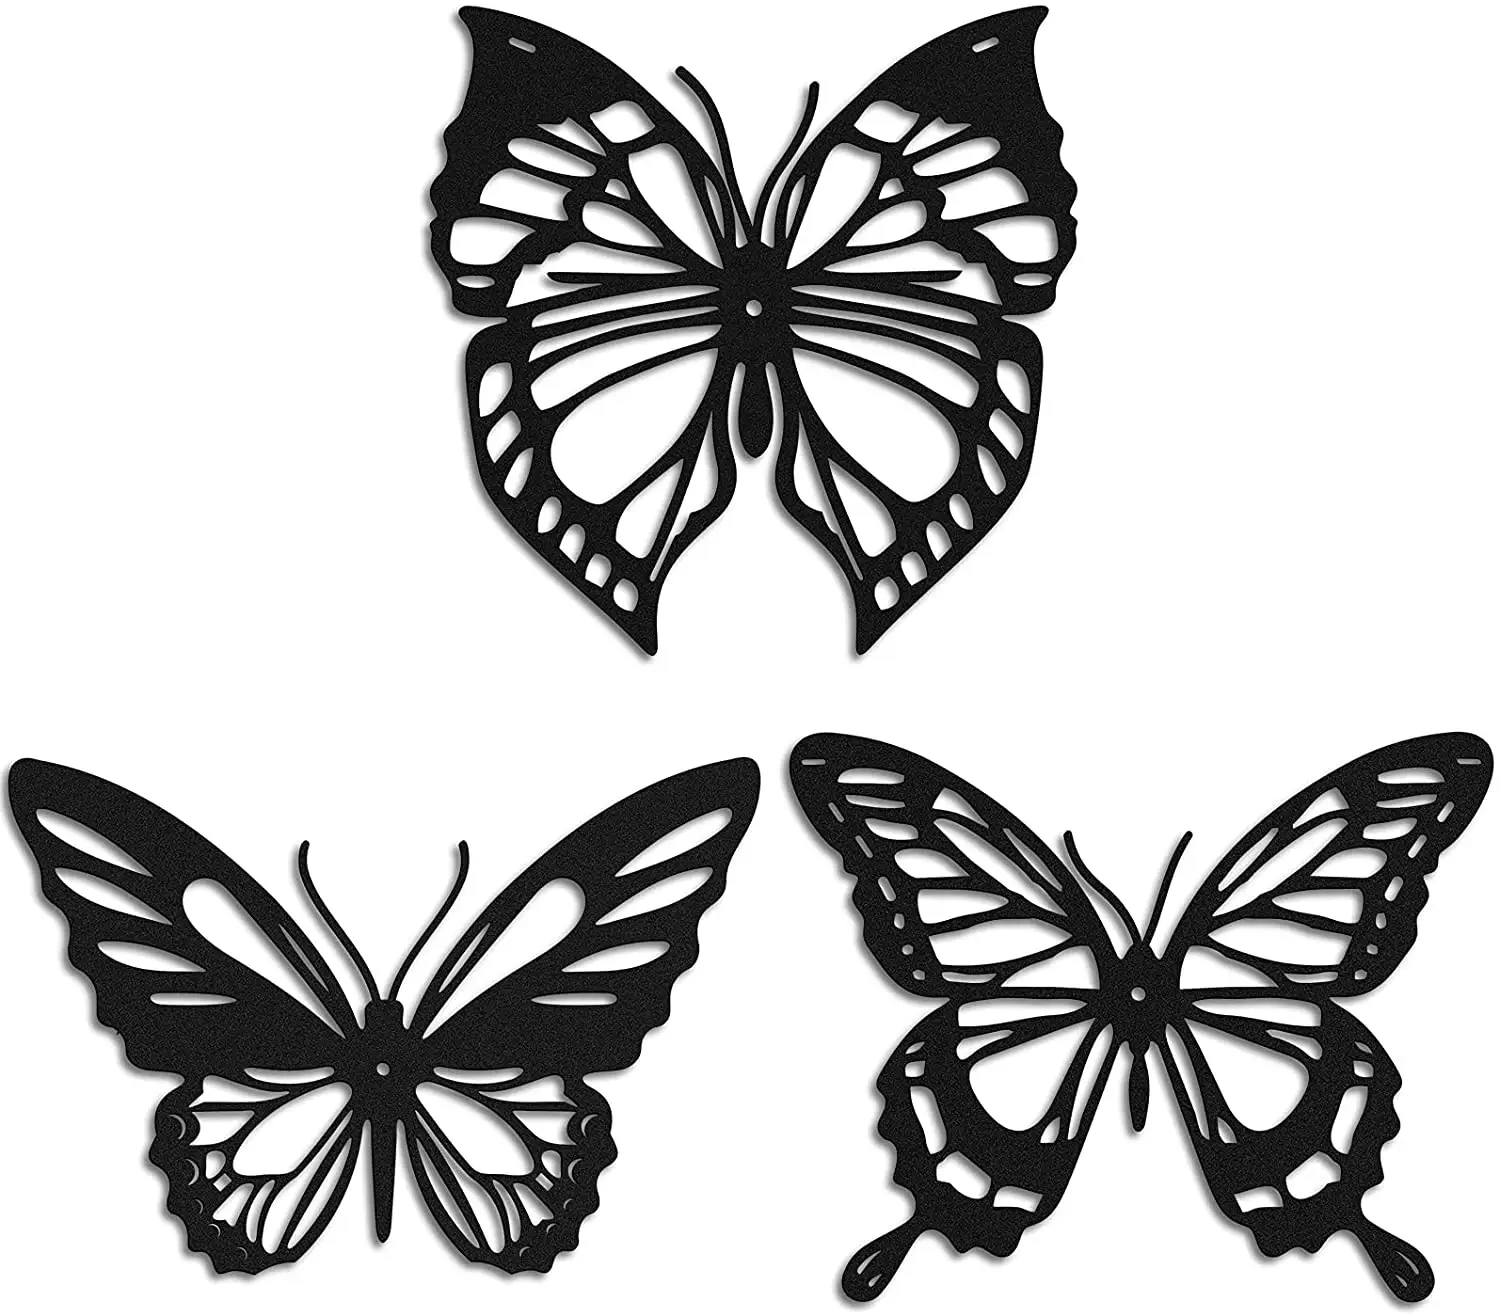 Metal Wall Decor Black Butterfly Metal Wall Art Hanging Wall Decor for Modern Farmhouse Rustic Easter Decorative Animal 1.2mm